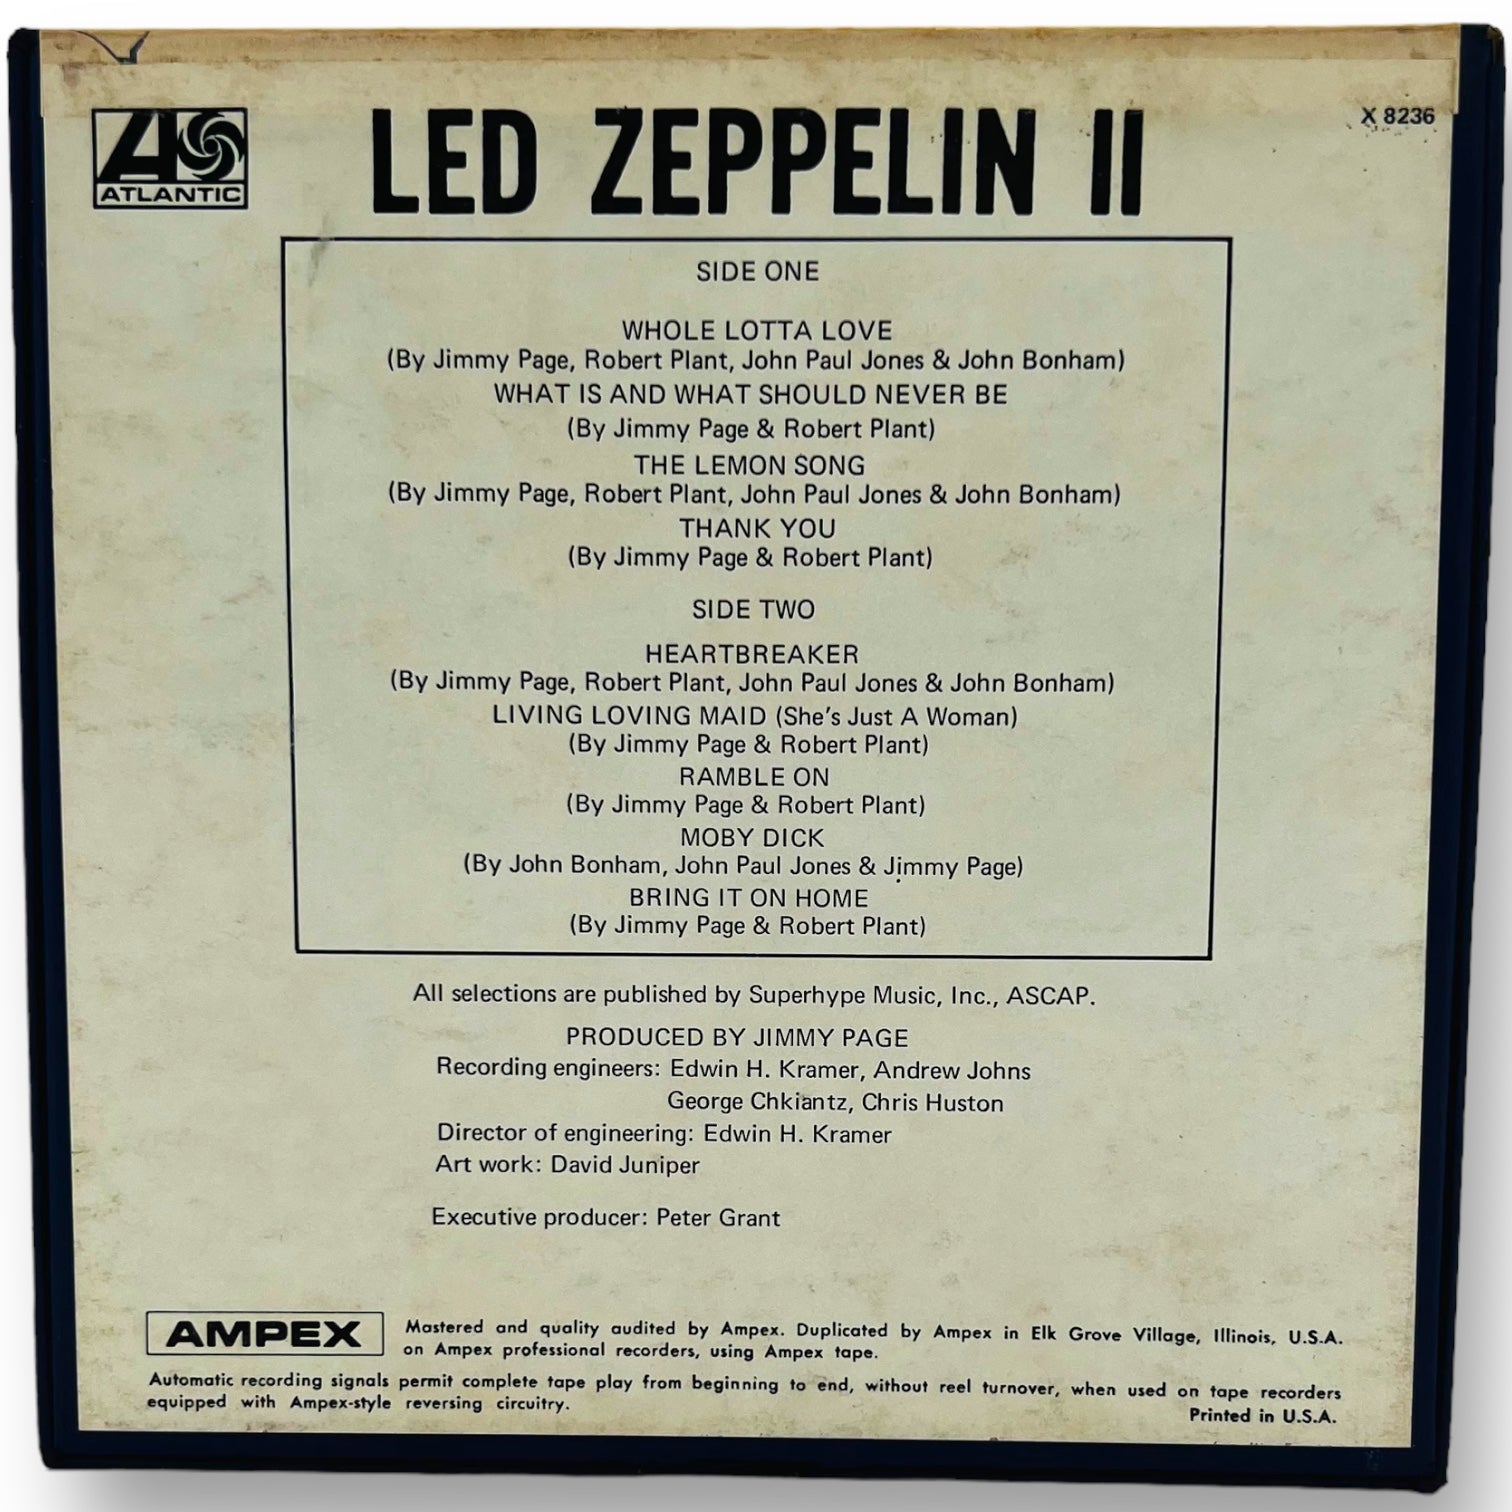 Led Zeppelin II The Only Way To Fly Reel to Reel Tape 3 3/4 IPS Atlantic